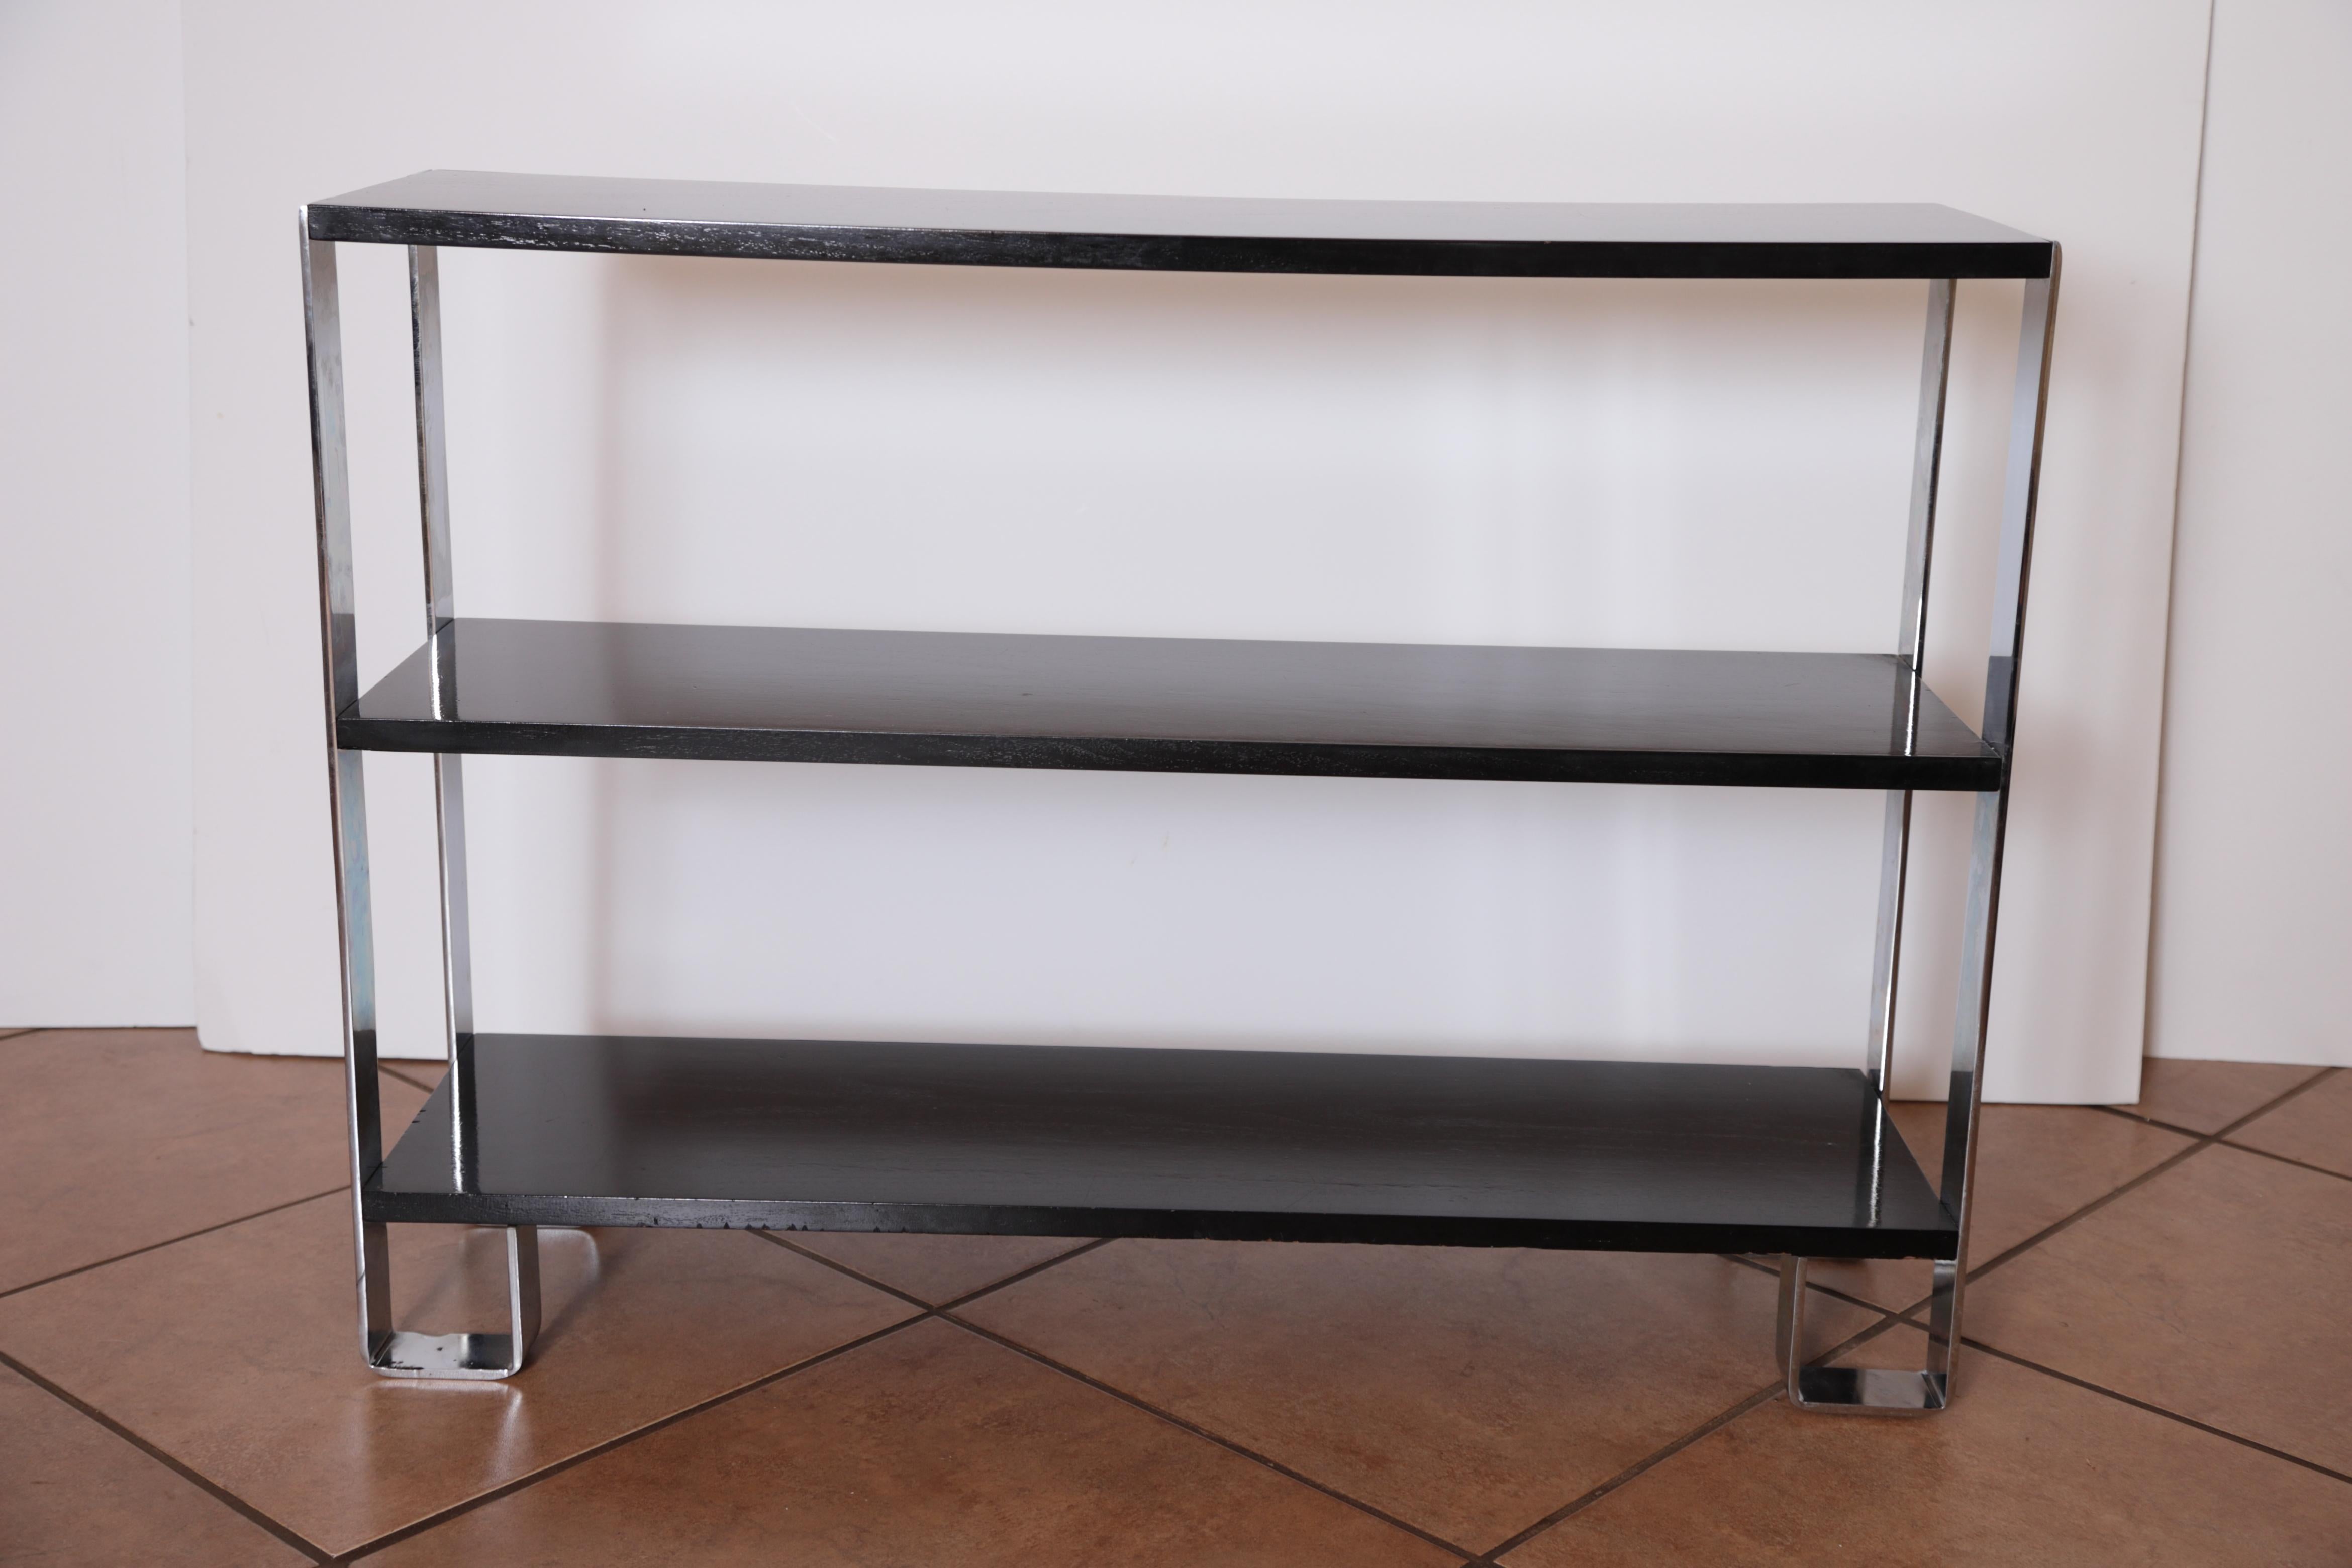 Machine Age Art Deco flat - band chrome / Black lacquer shelf, in the manner of Donald Deskey
bookcase entertainment center shelves console sofa table.

A nicely restored example of rectilinear modernist design, in the manner of Deskey and